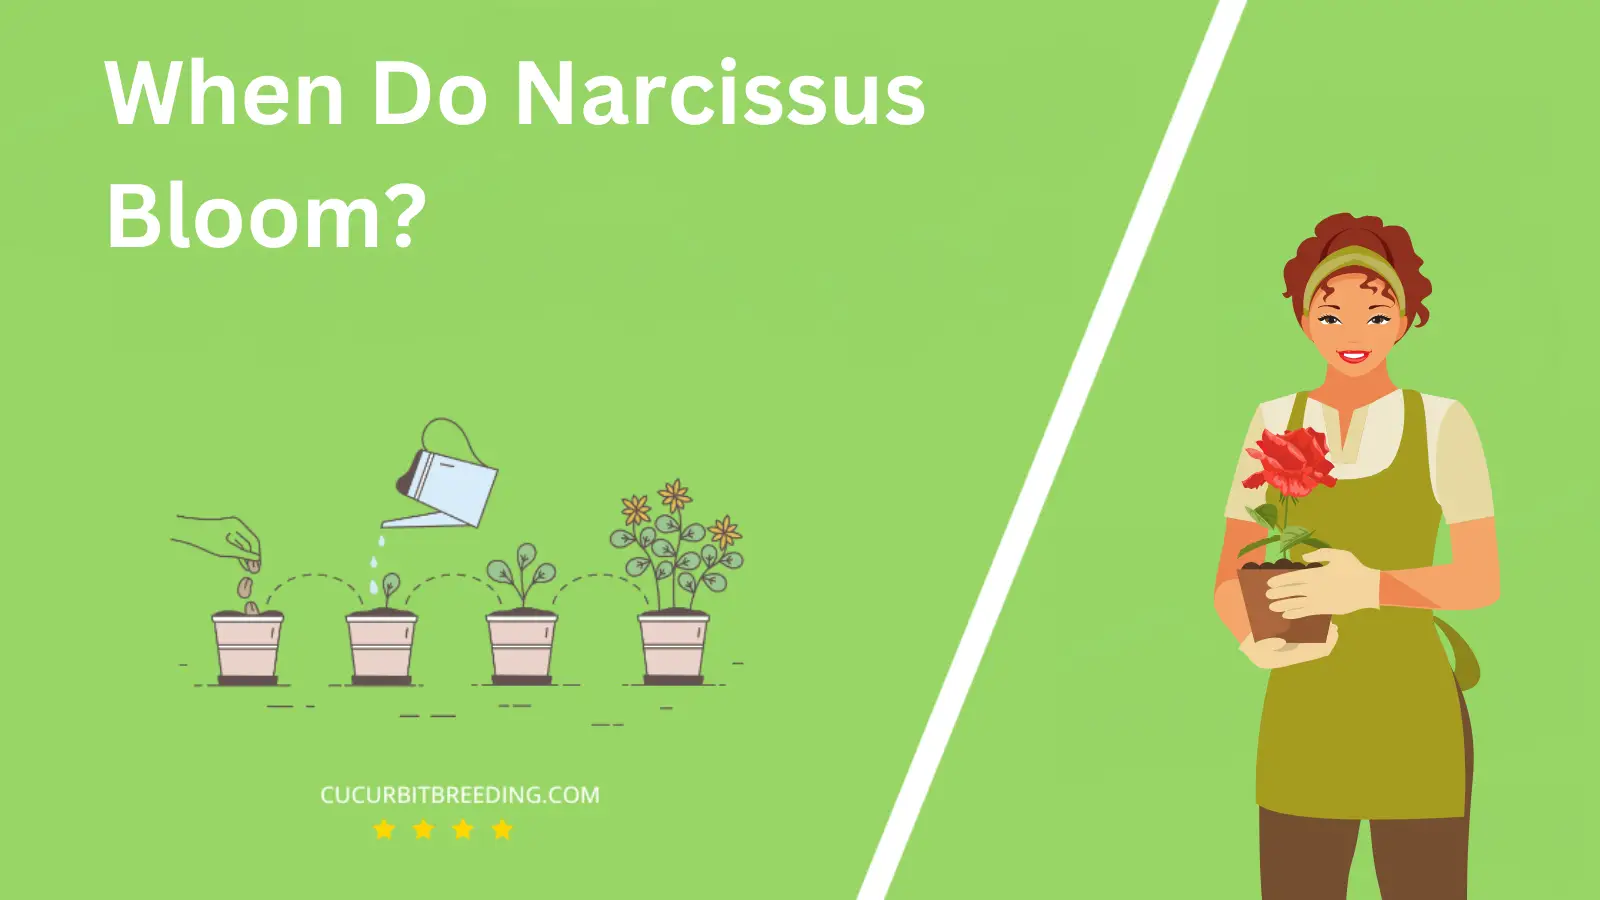 When Do Narcissus Bloom?